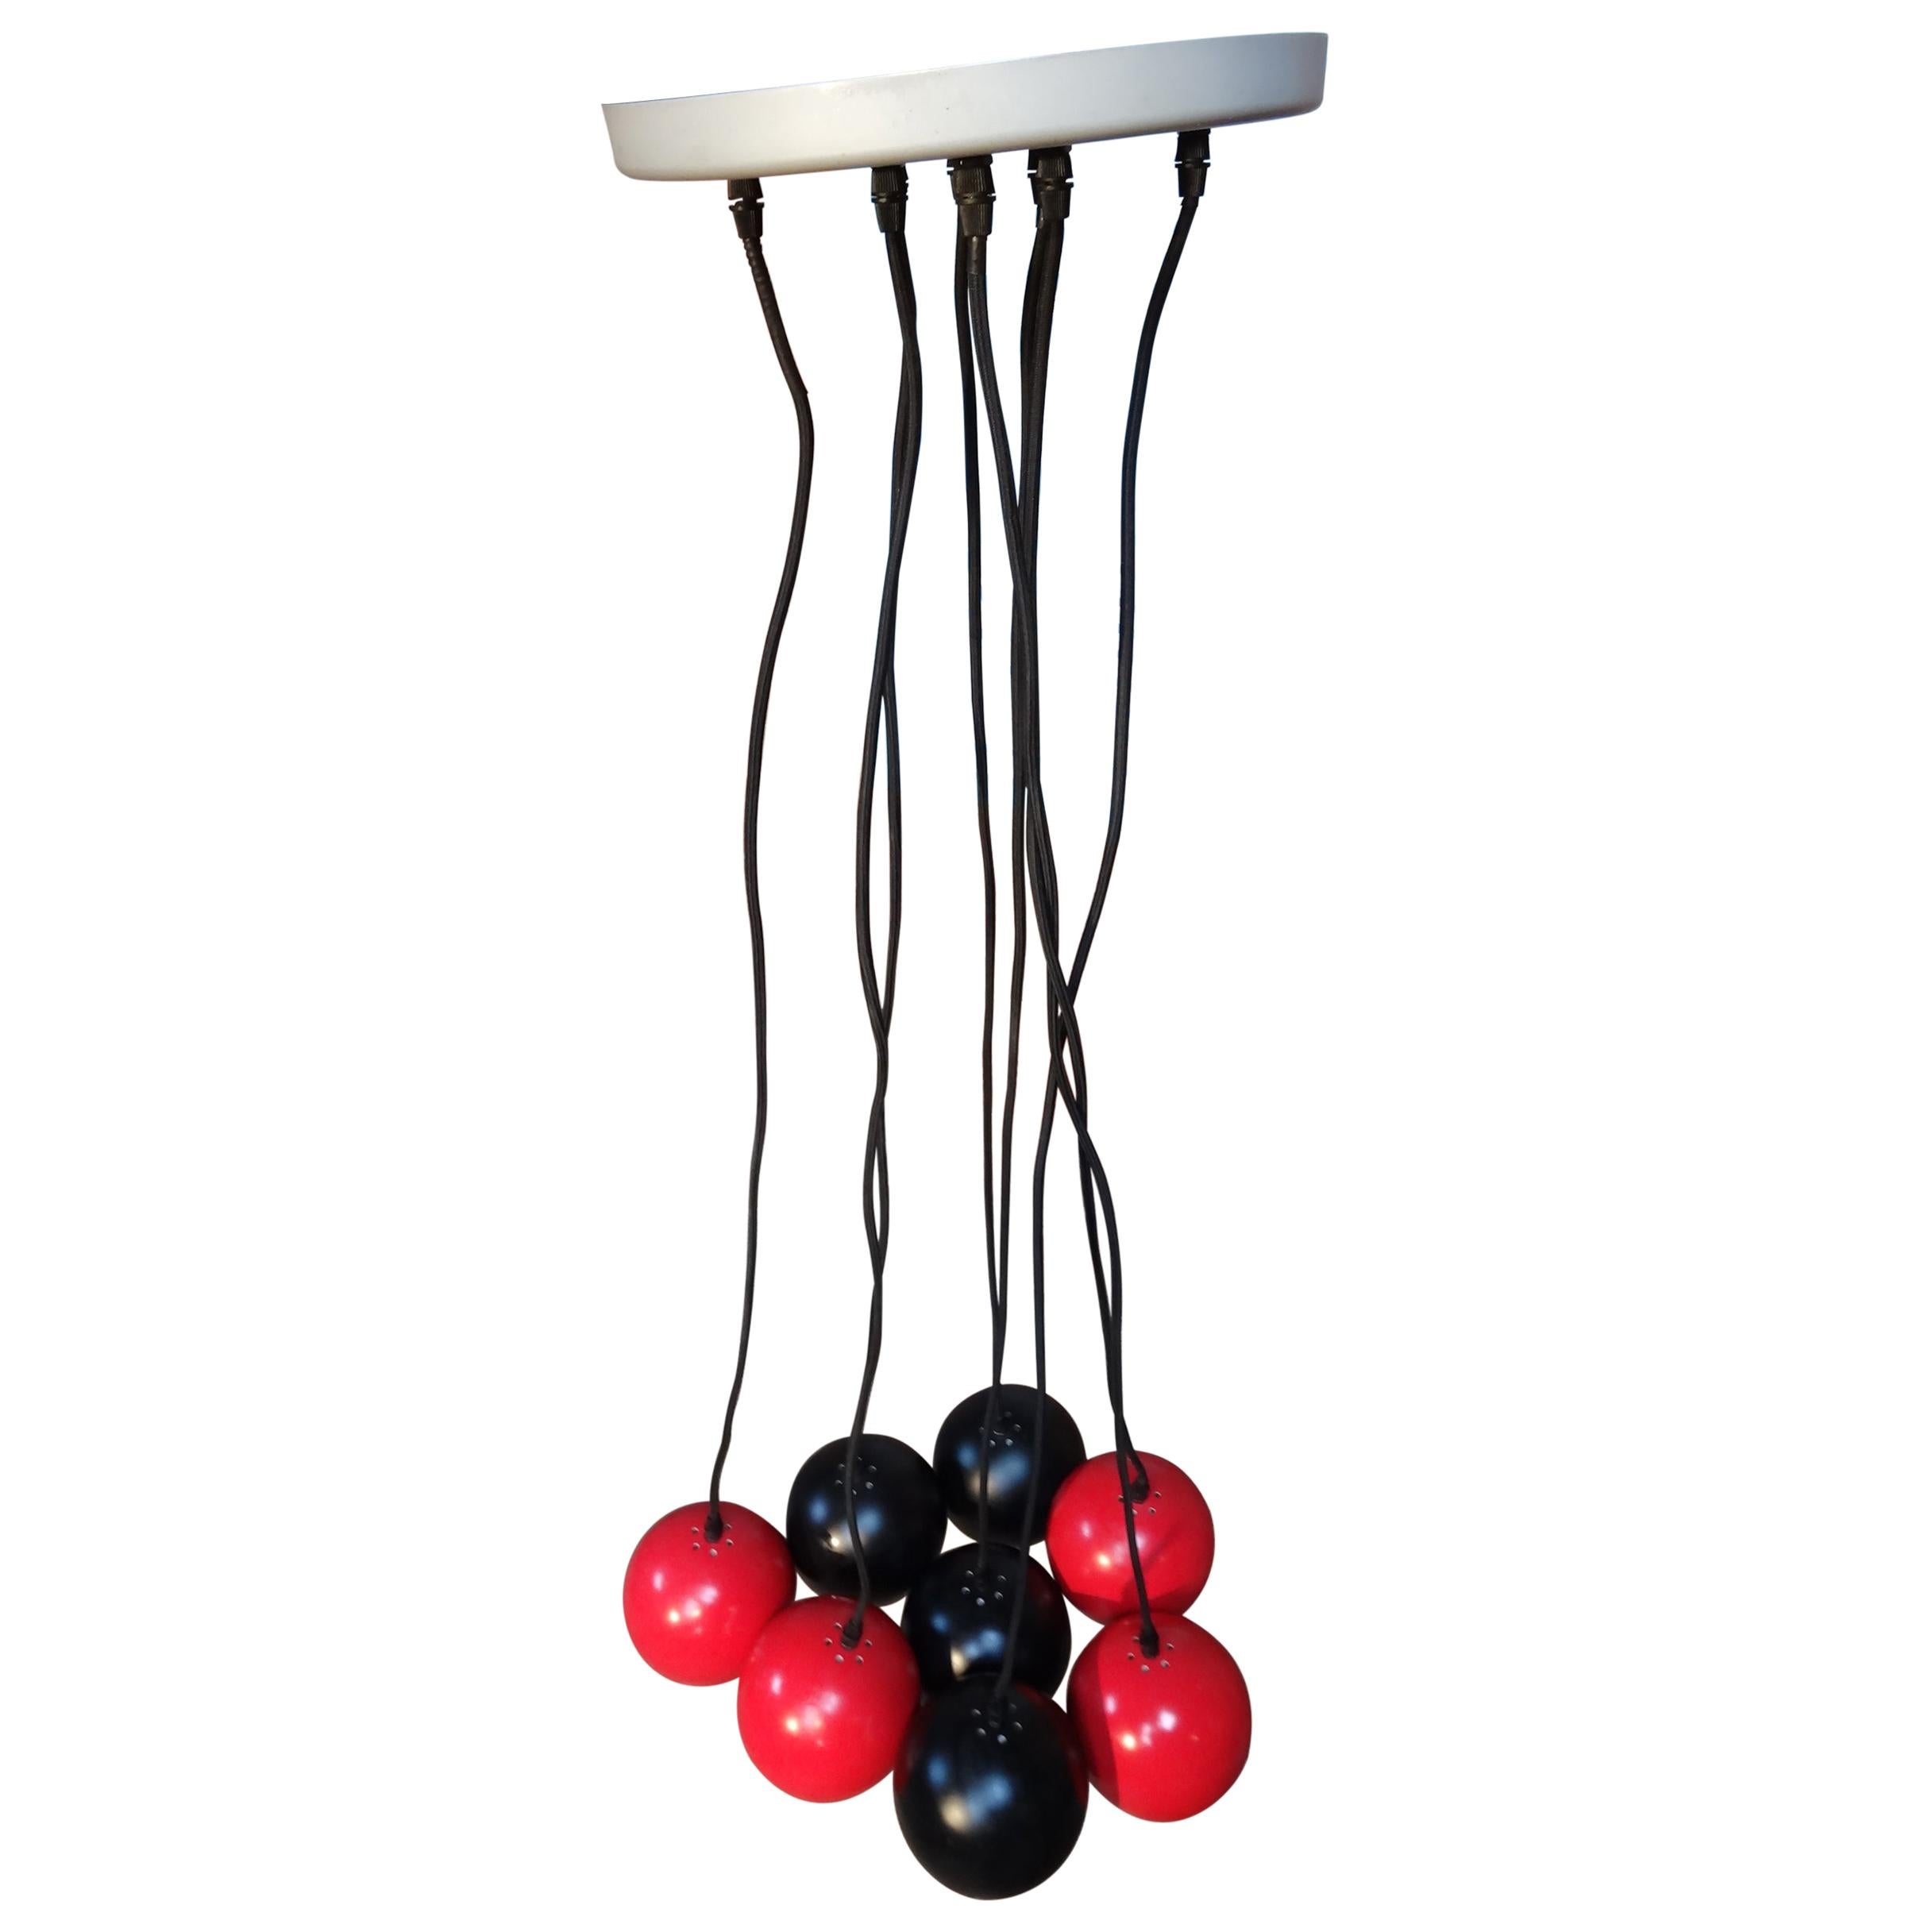 Vintage 1970 Super Retro Metal 8 Ball Black and Red Ceiling Light